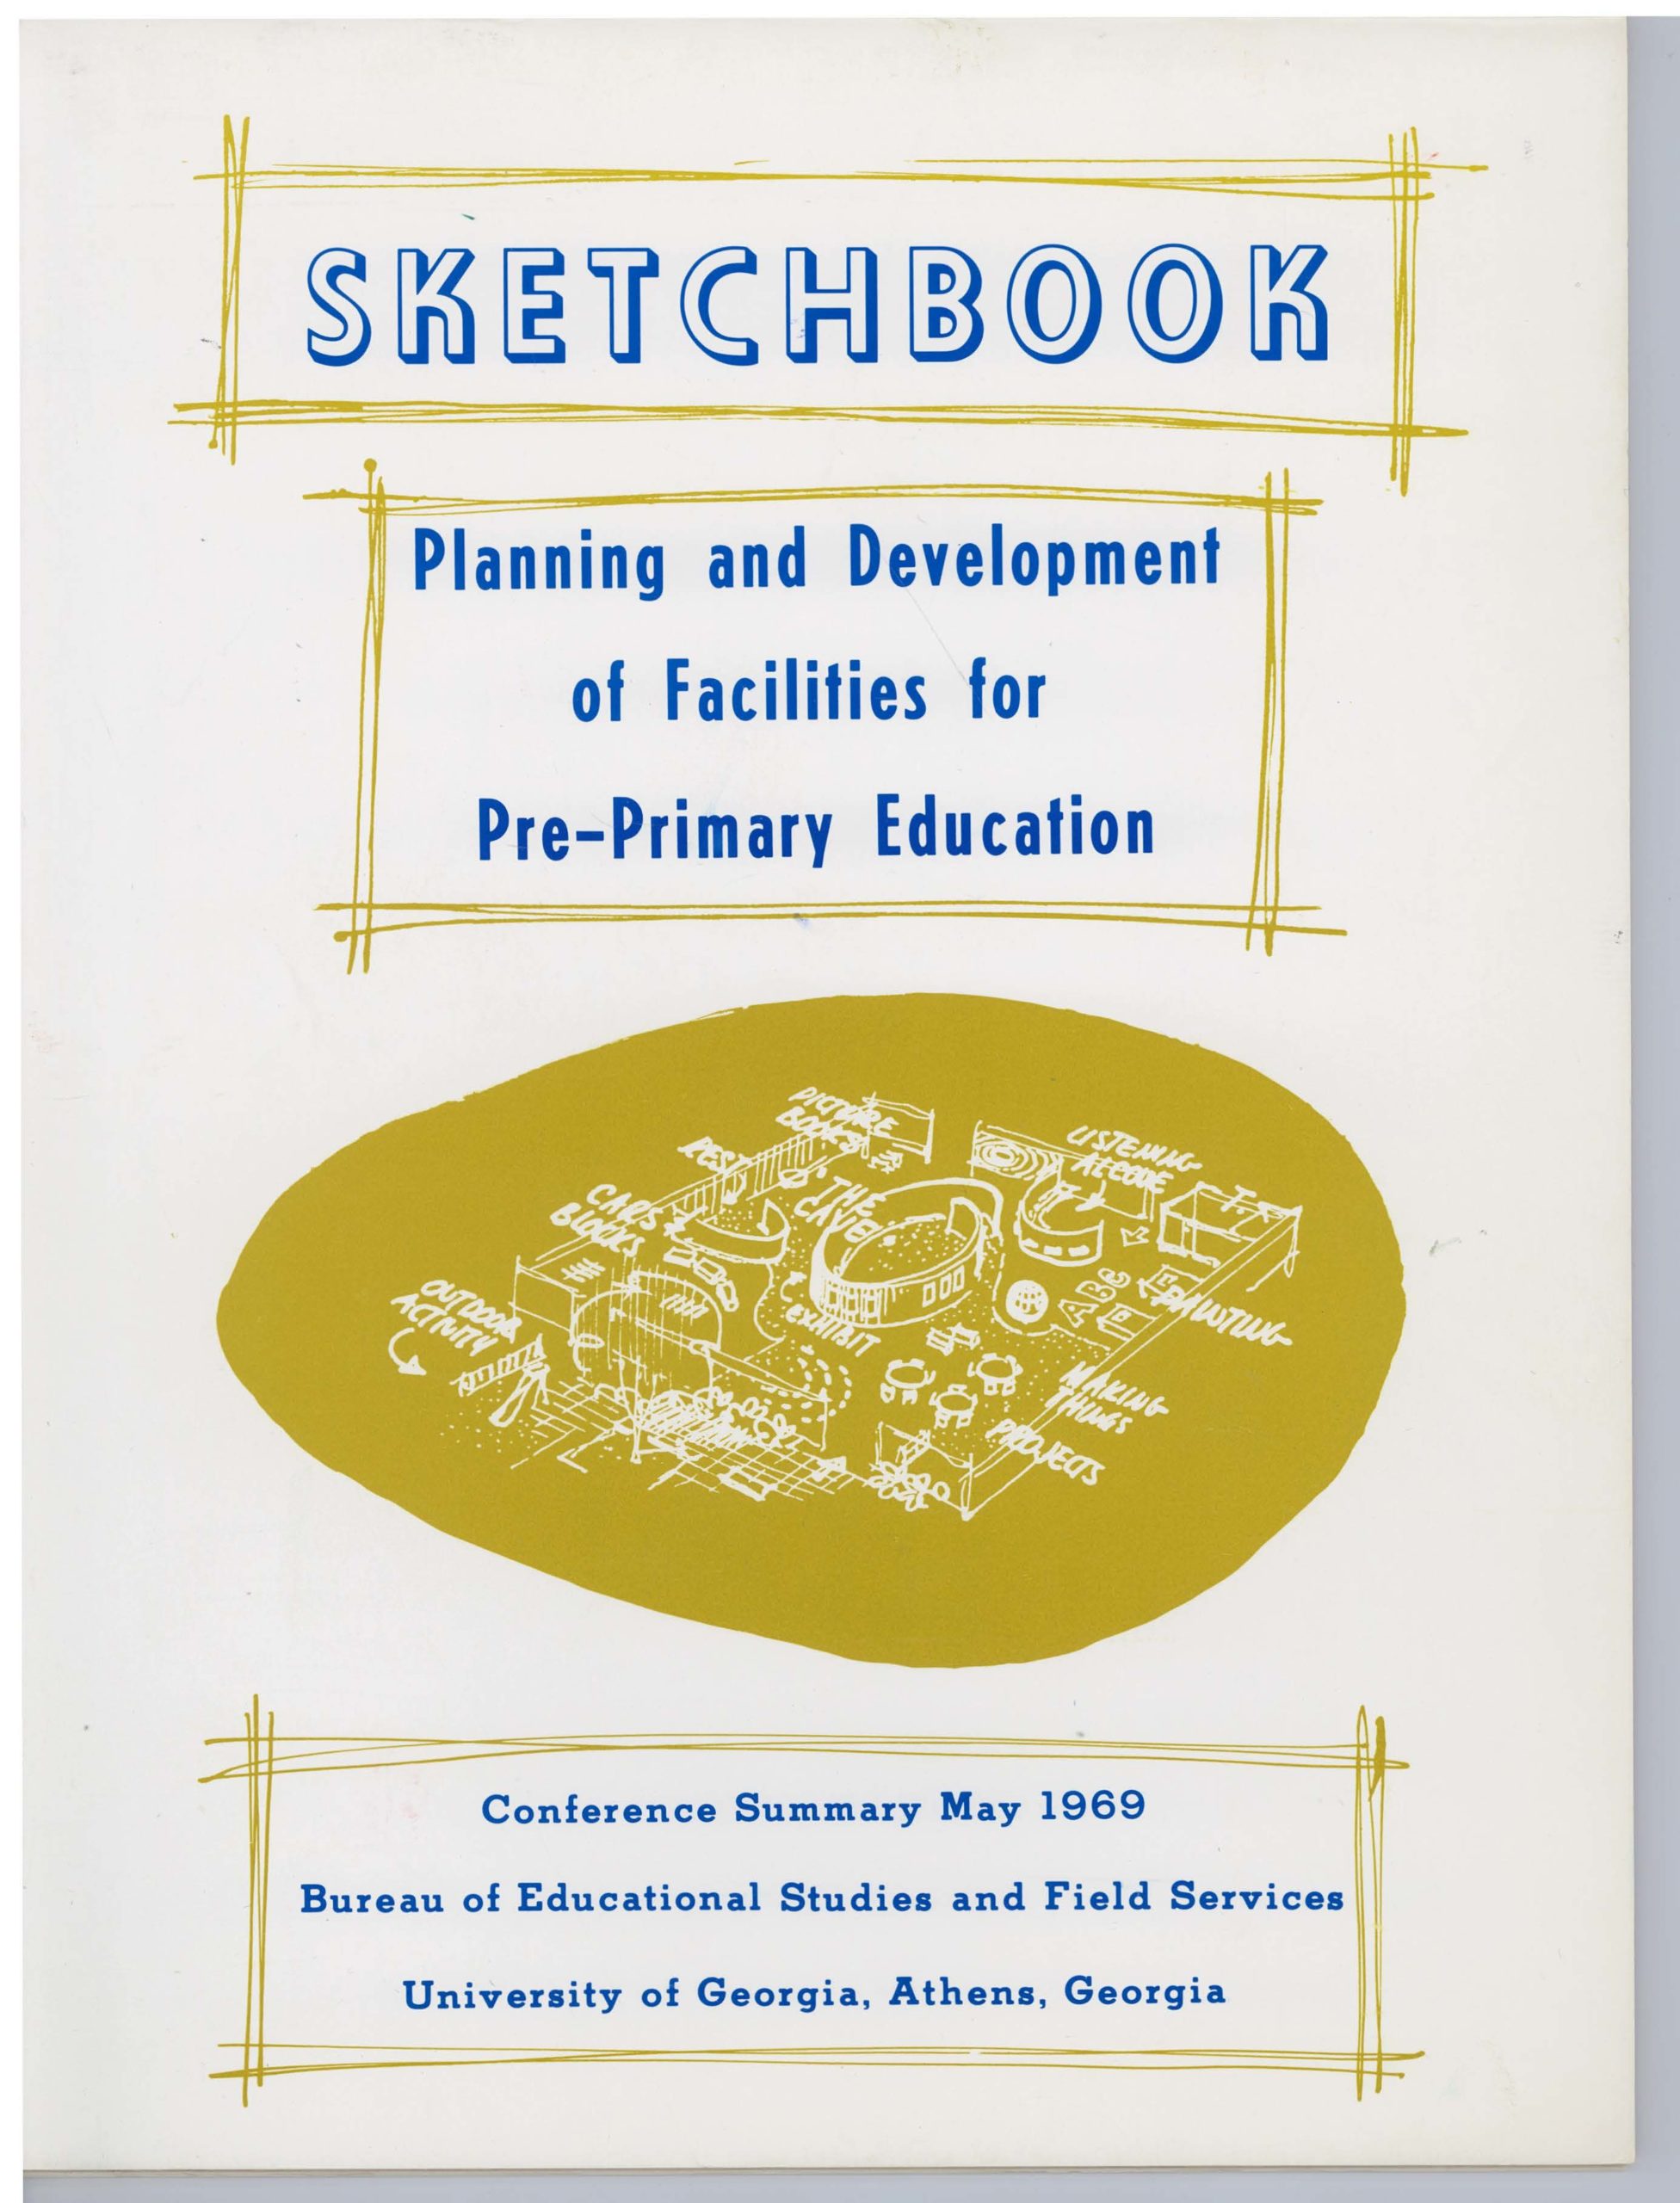 Planning and Development of Facilities for PrePrimary Education_Brubaker Conference Summary Sketchbook 1969_Page_01